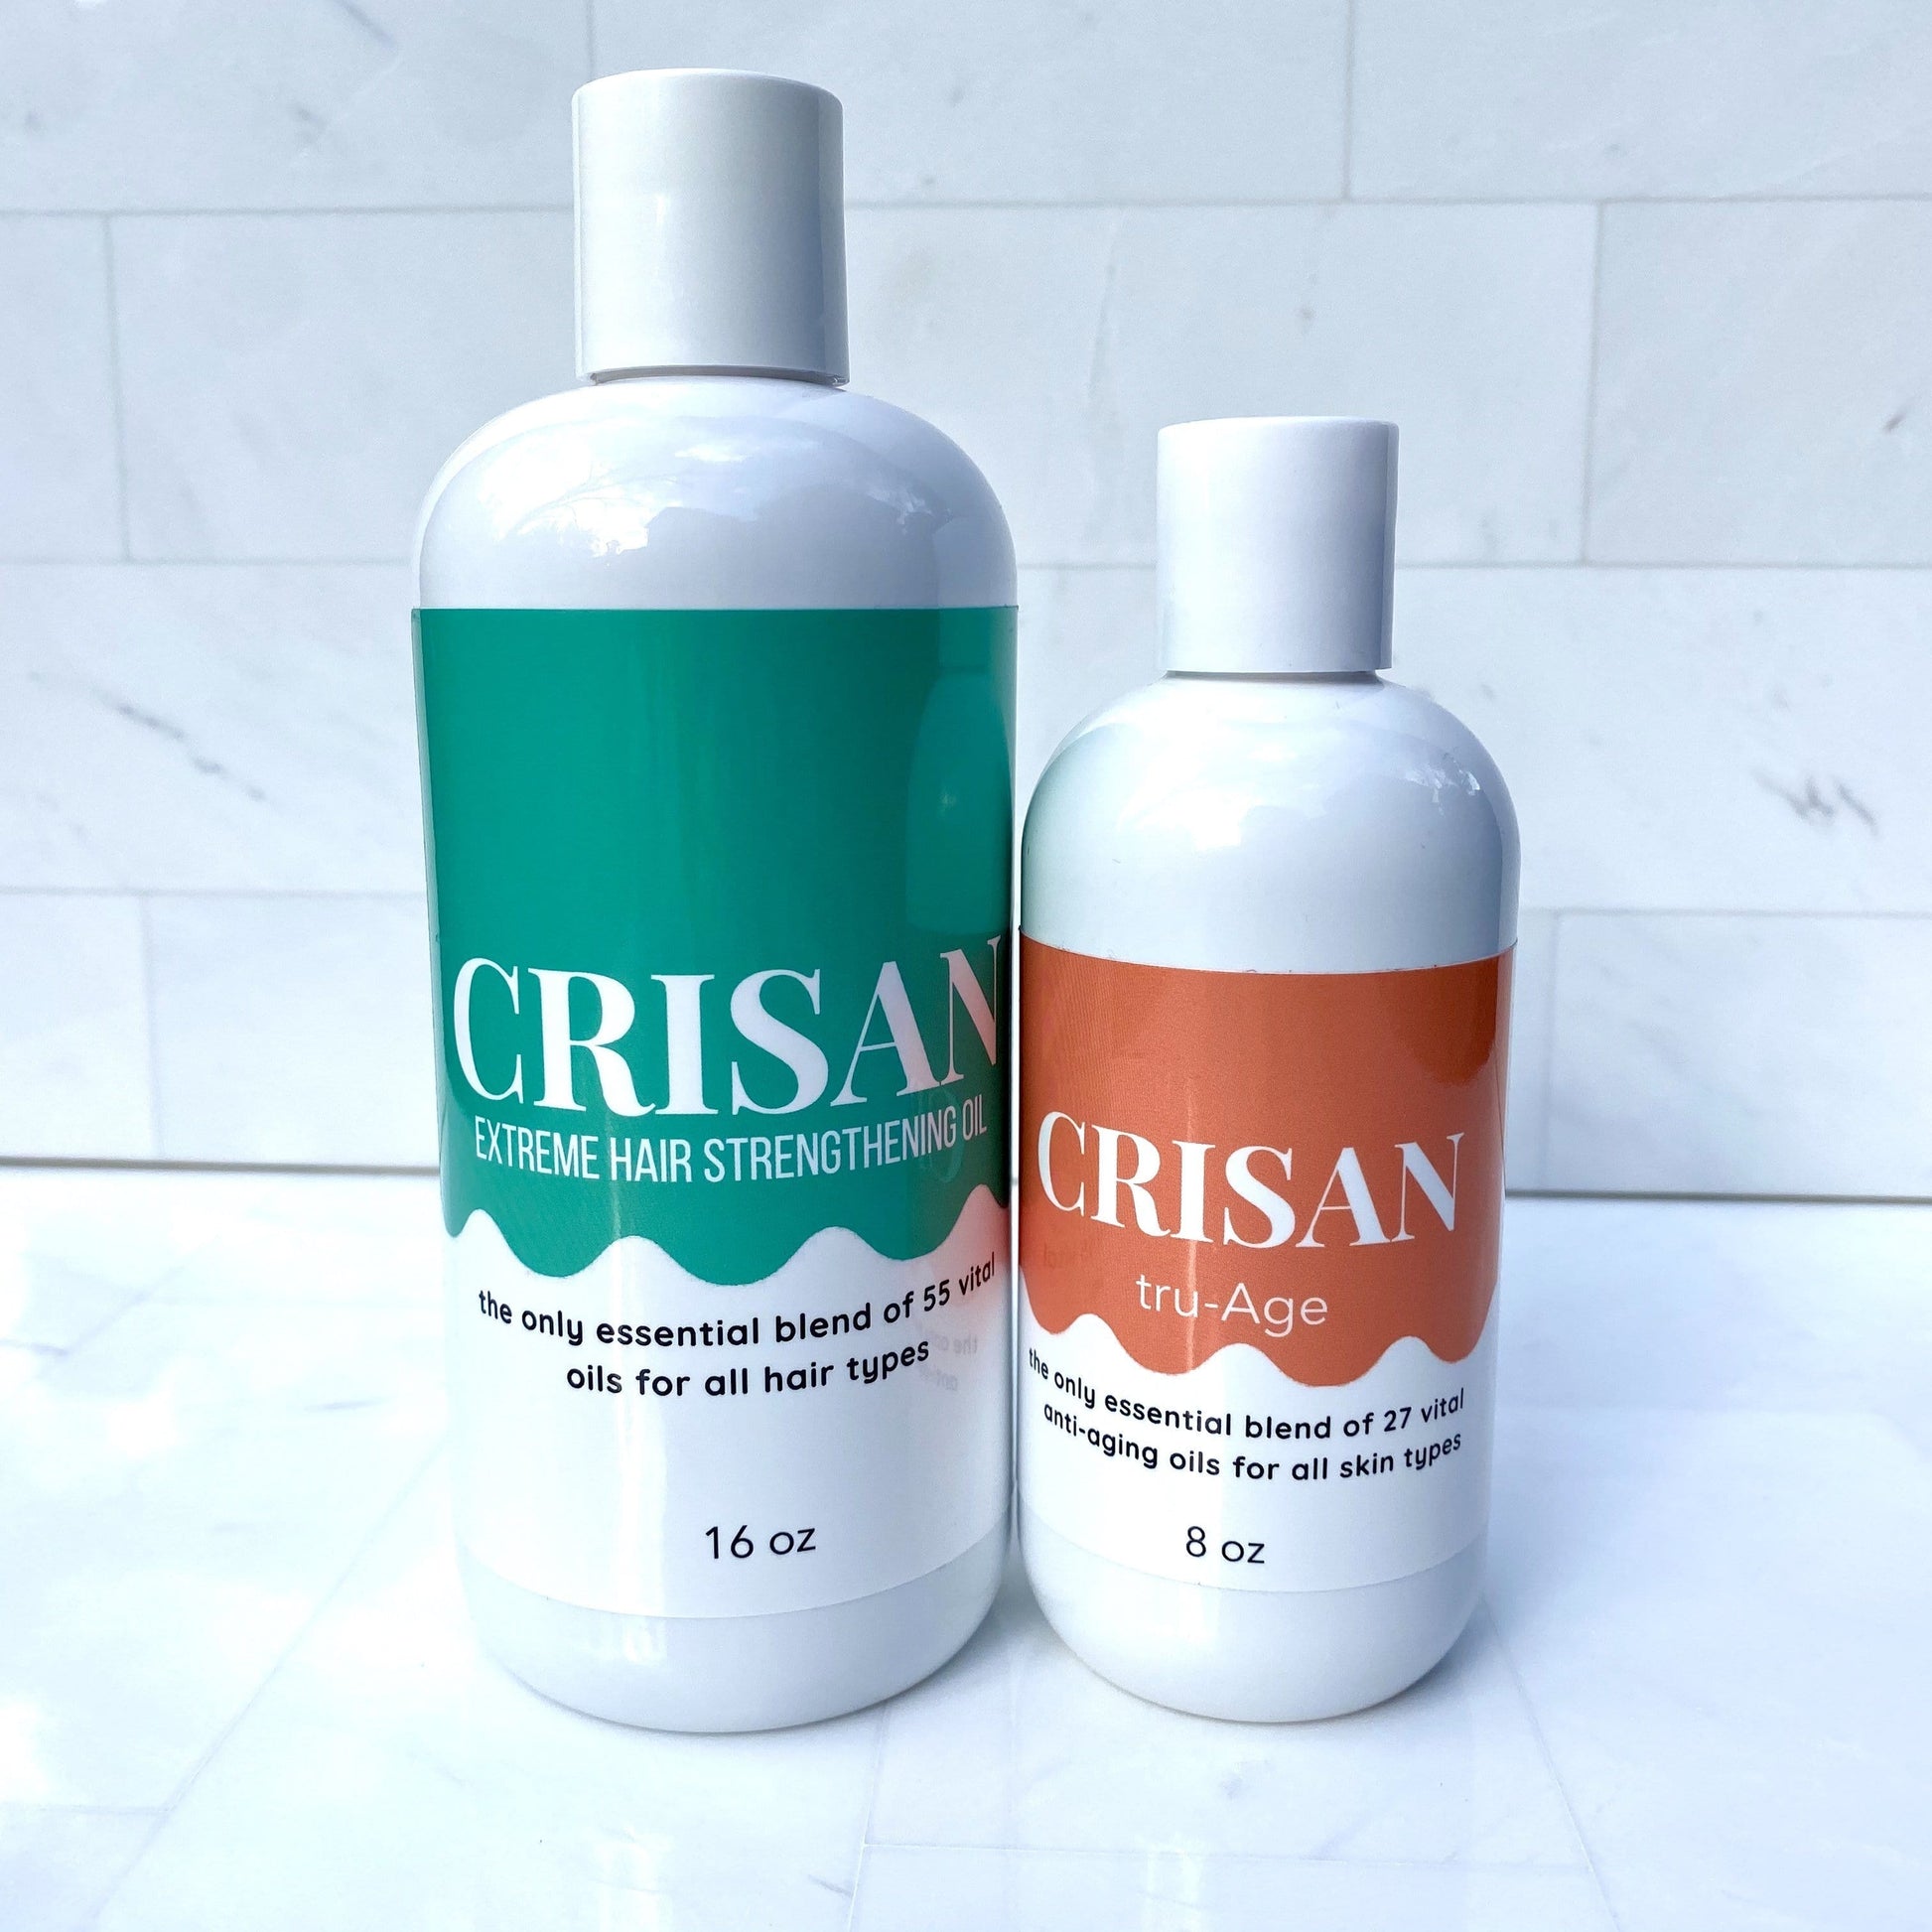 Buy THIS Get THAT 50% OFF! - CRISAN Beauty